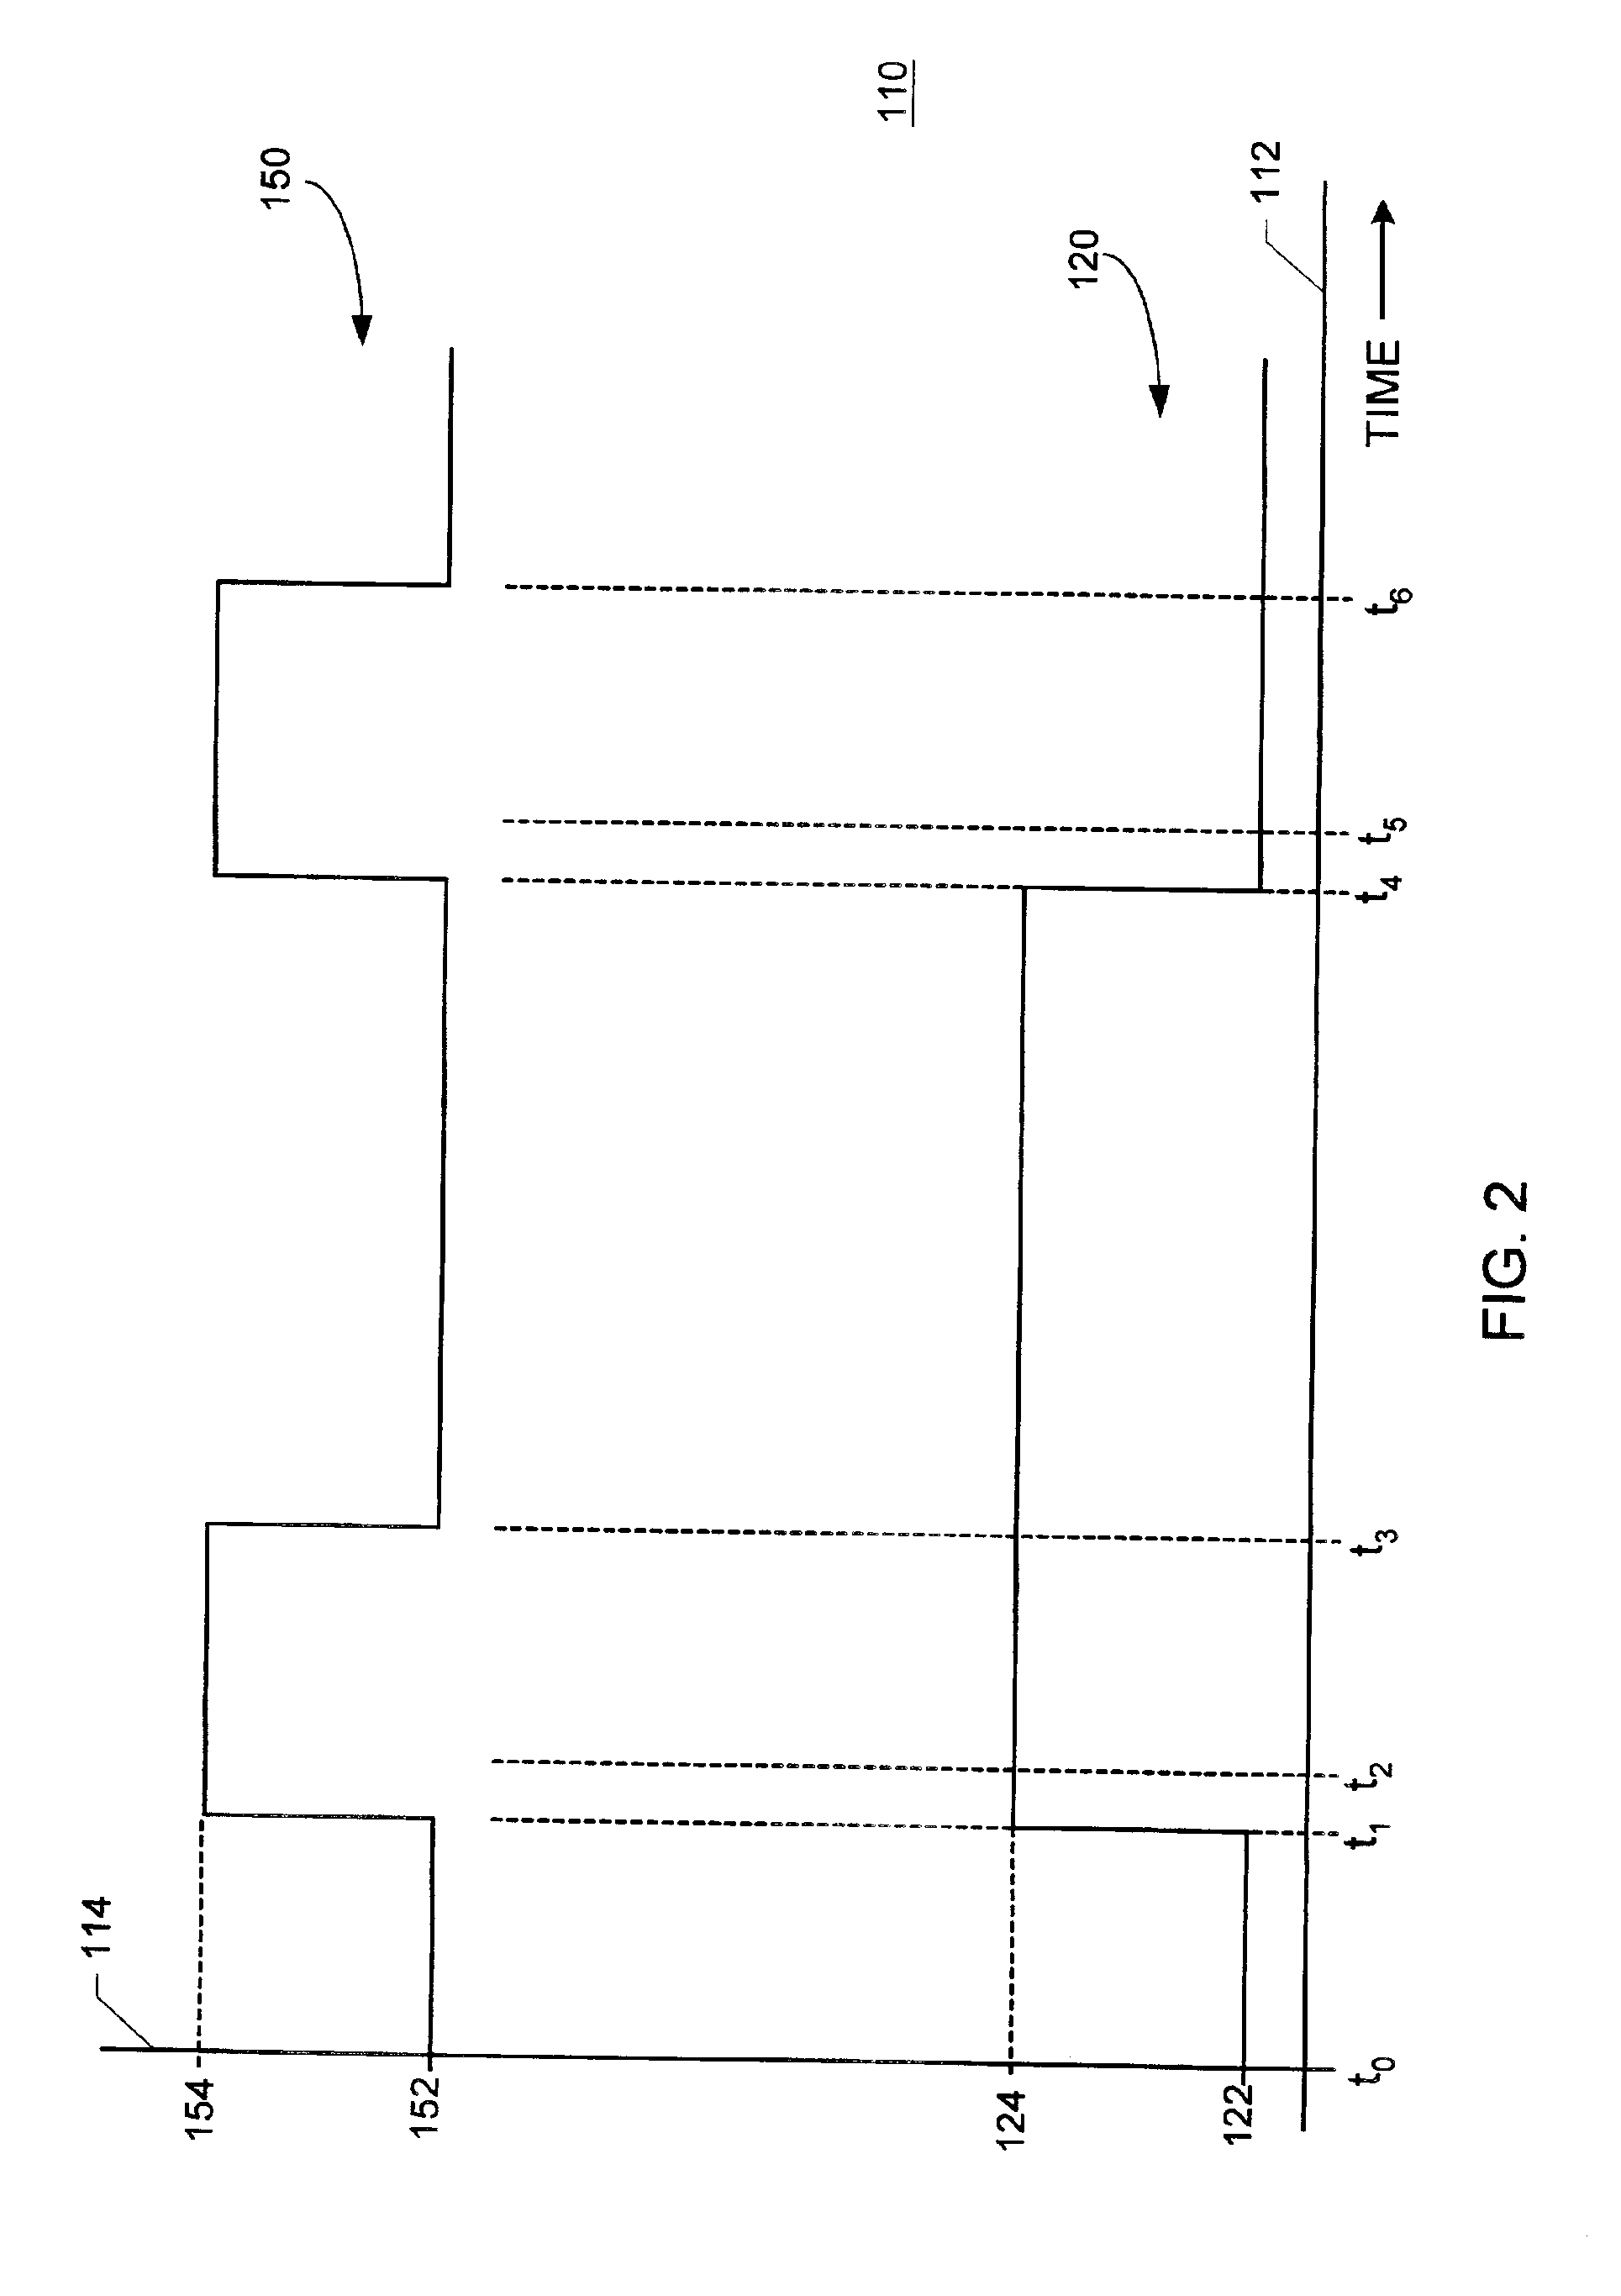 Apparatus and method for controlling an electrical switch array